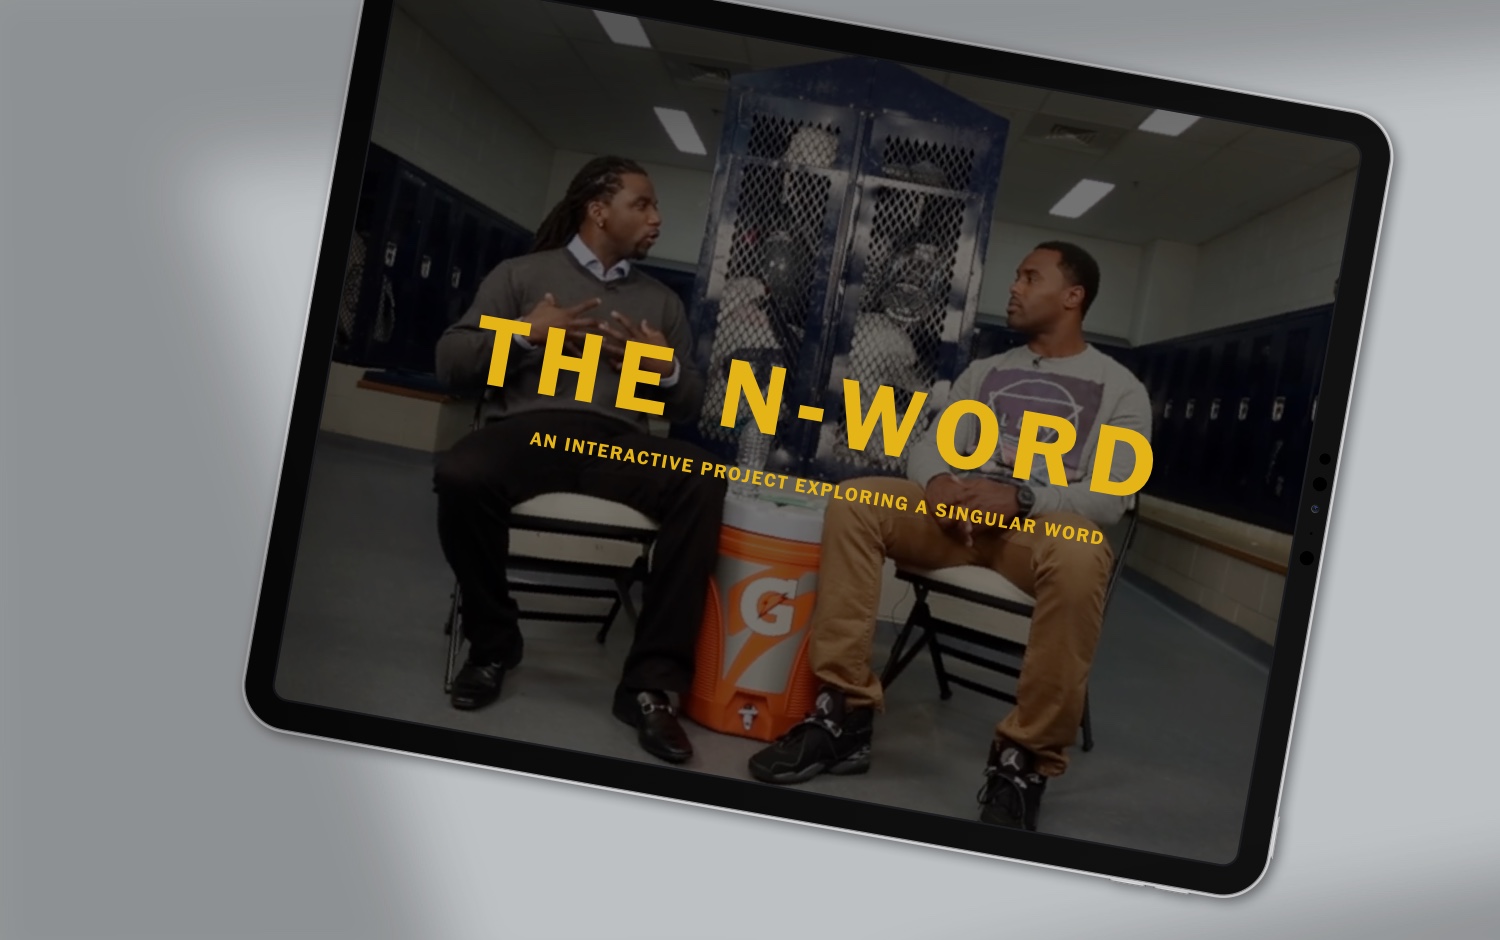 The N-Word Project